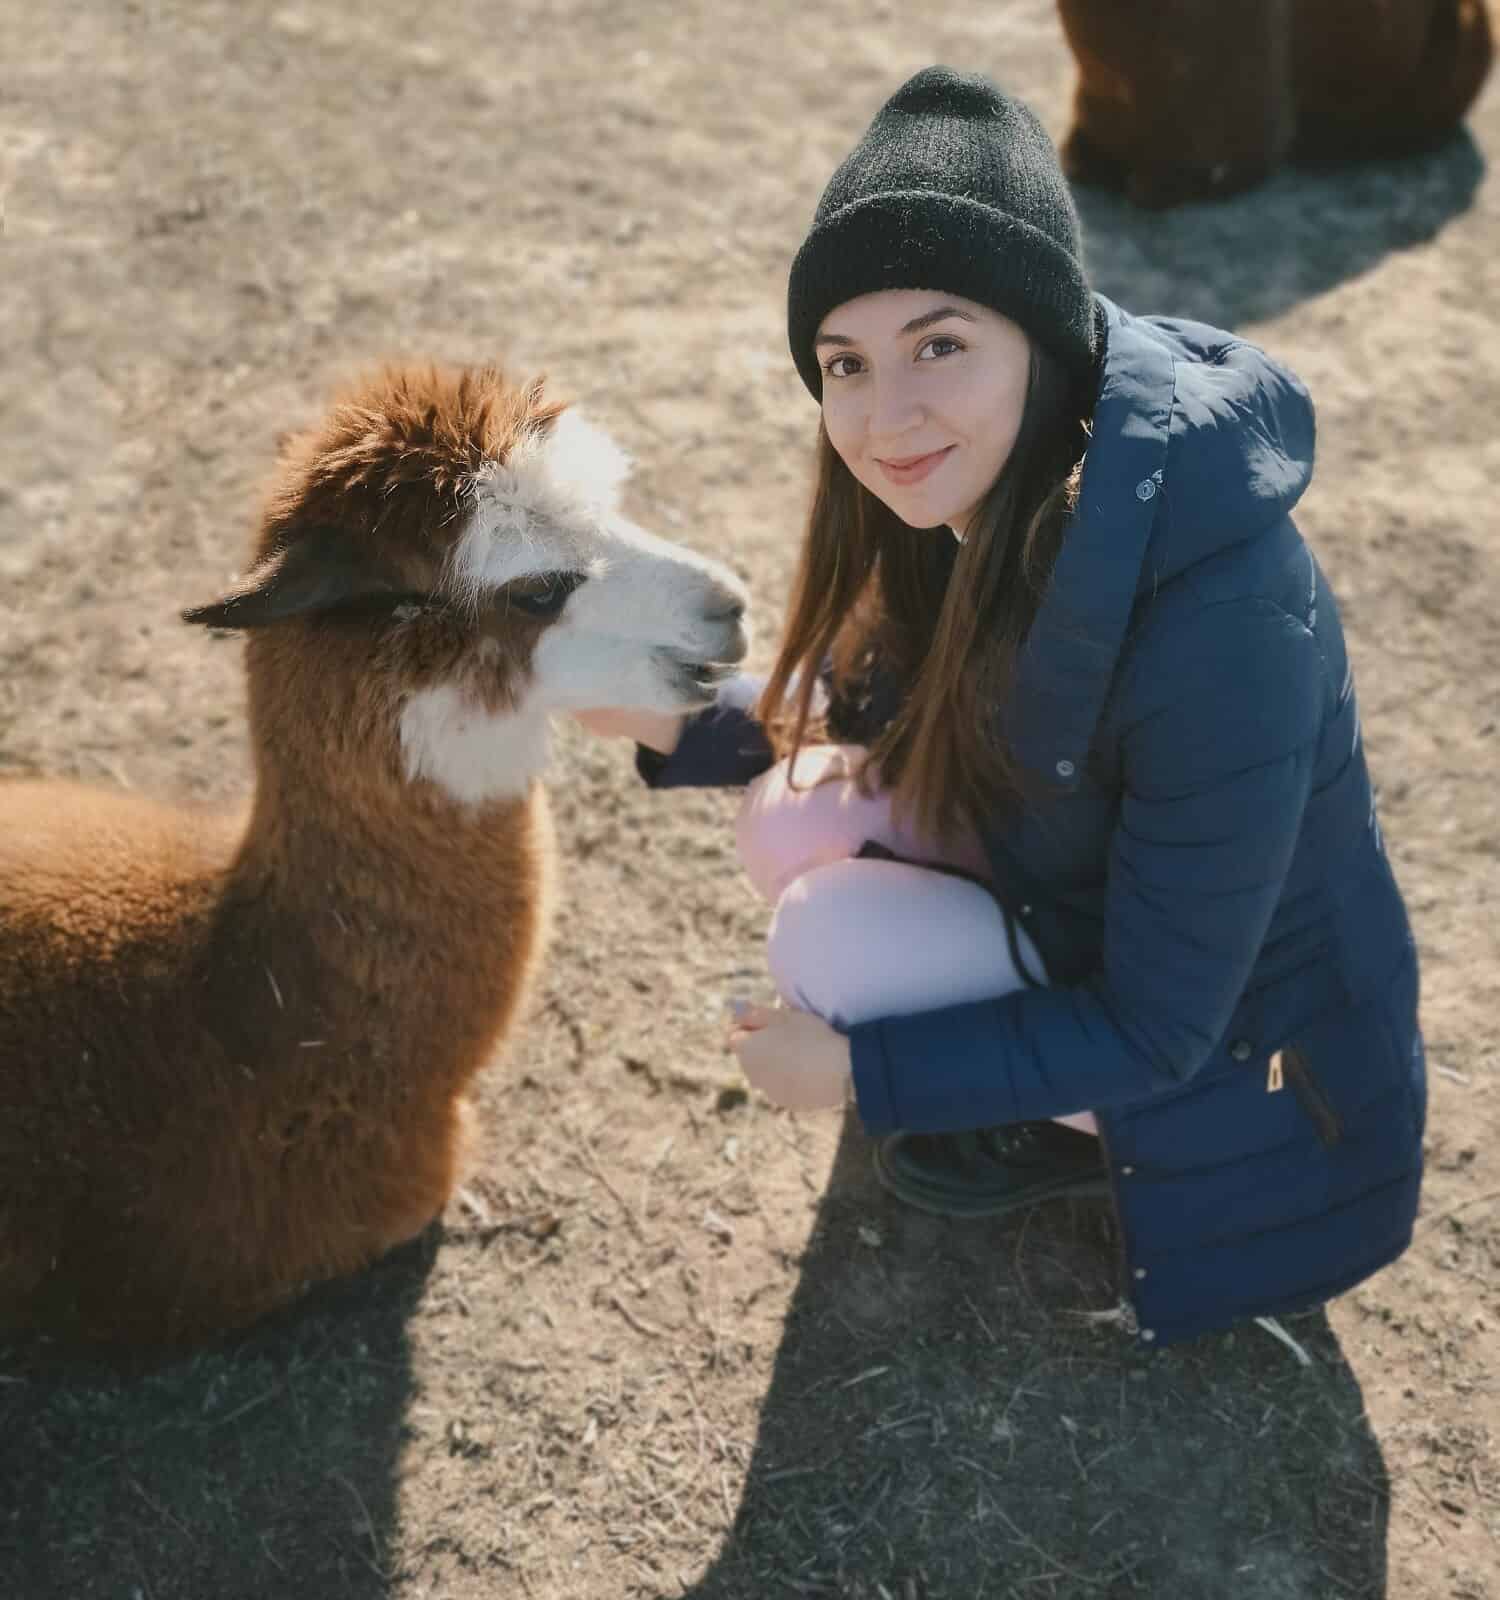 grainy photo.funny cute woman with llama.girl with llama at the zoo.walking with llama.funny photo with animal.free range animal.rescue animals.funny photo with pet.girl and alpaca.love of animals.